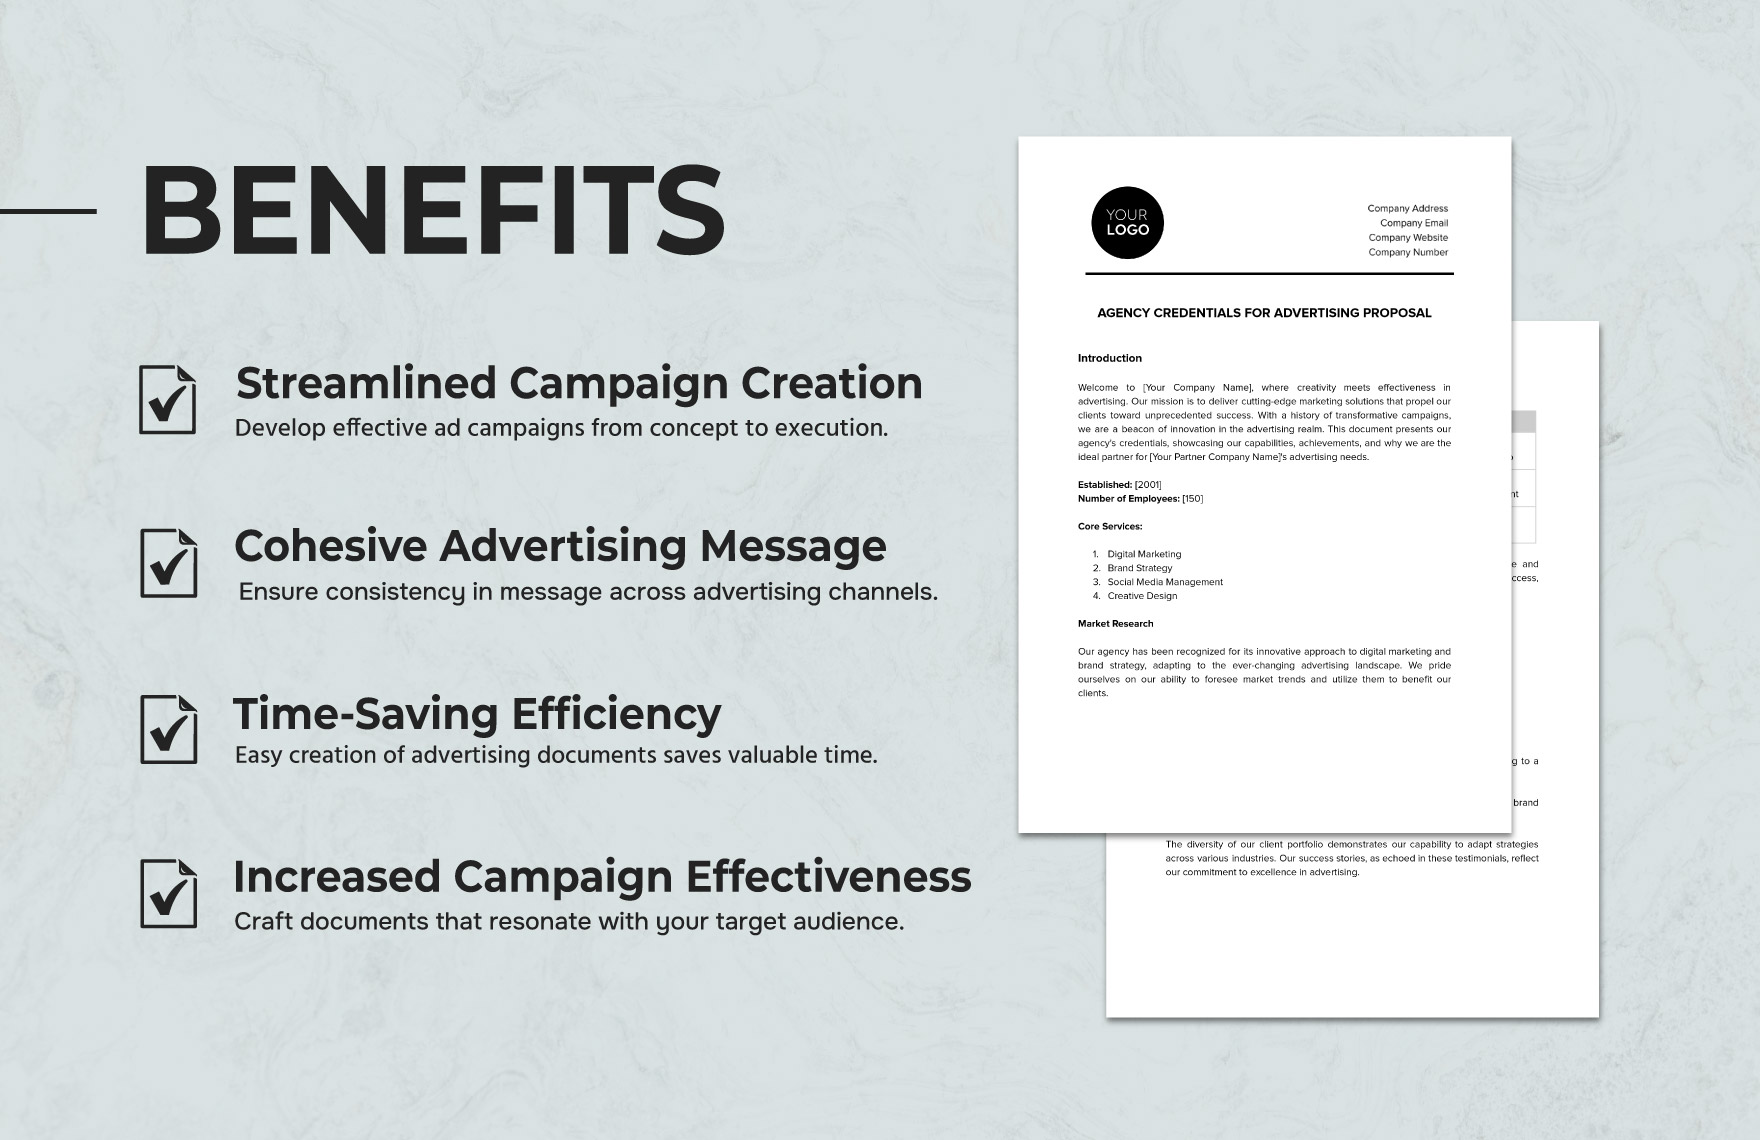 Agency Credentials for Advertising Proposals Template